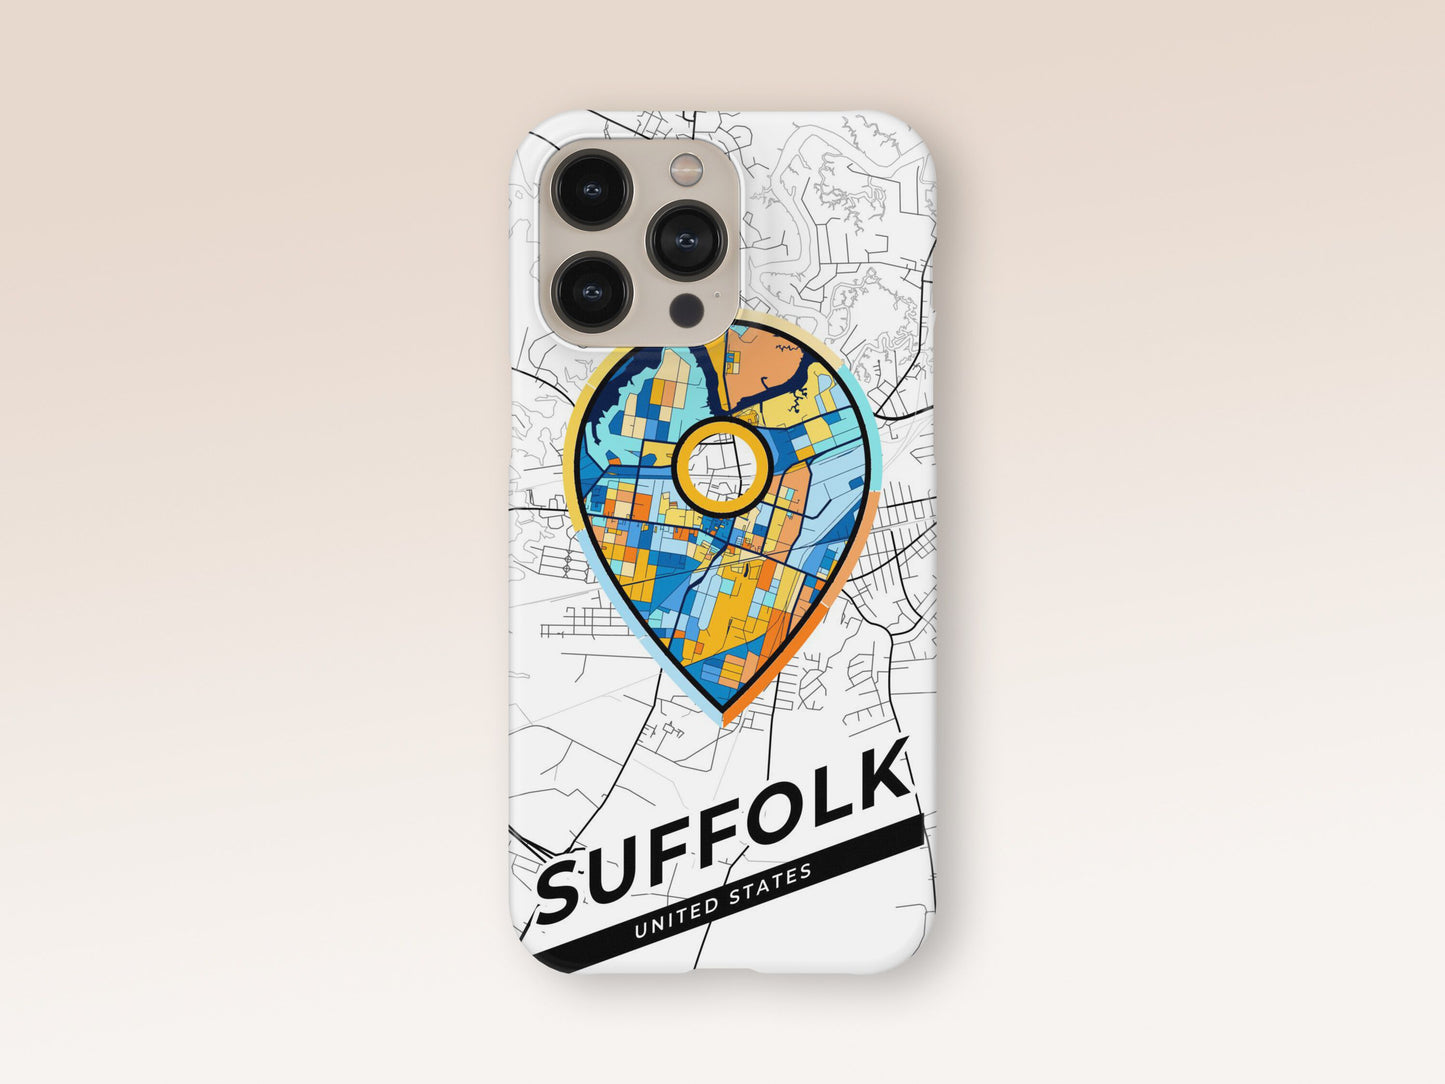 Suffolk Virginia slim phone case with colorful icon 1